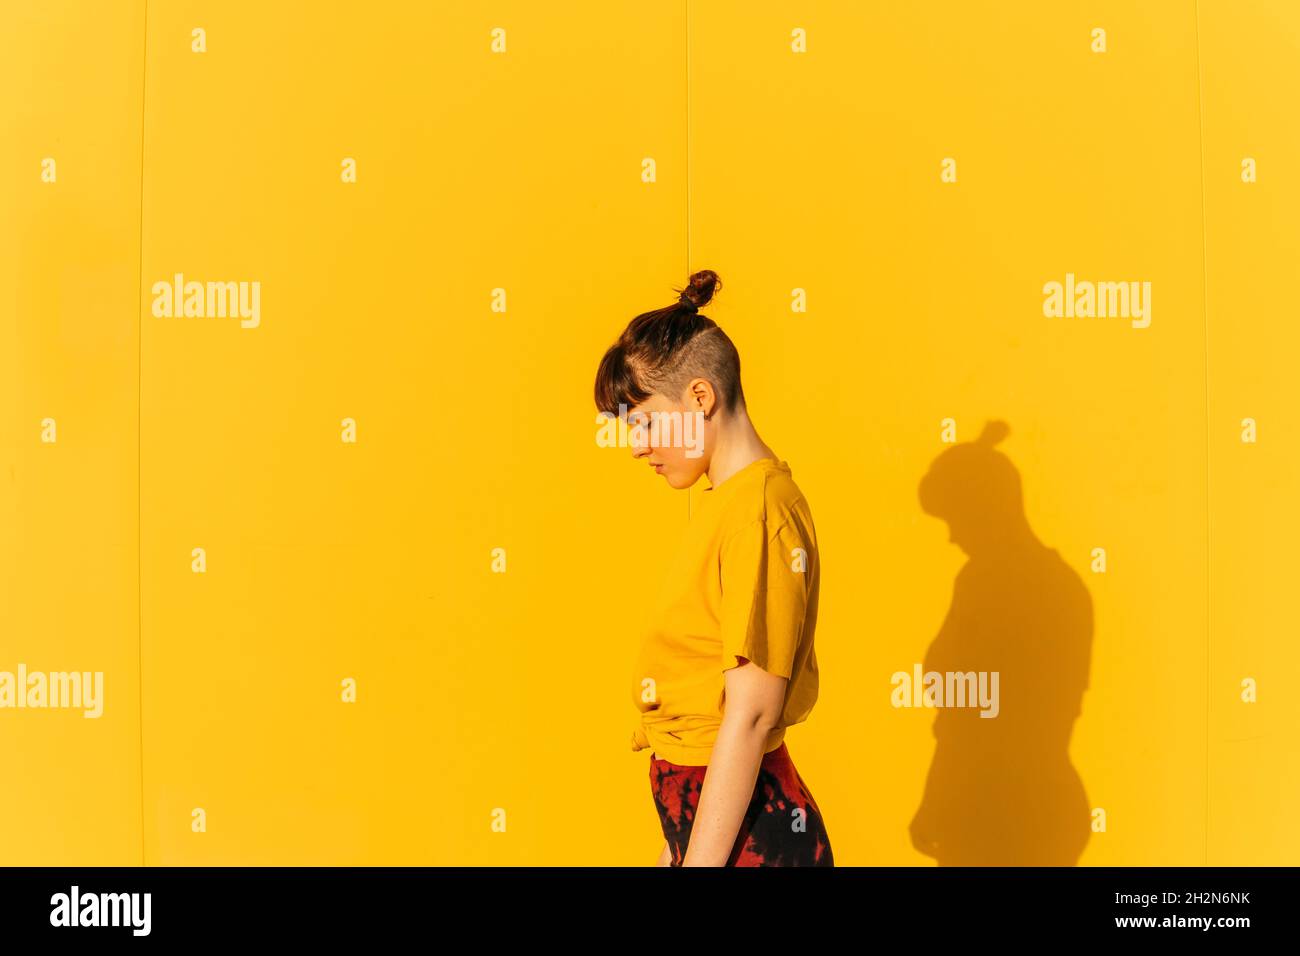 Androgynous person with half-shaved hairstyle standing by yellow wall Stock Photo